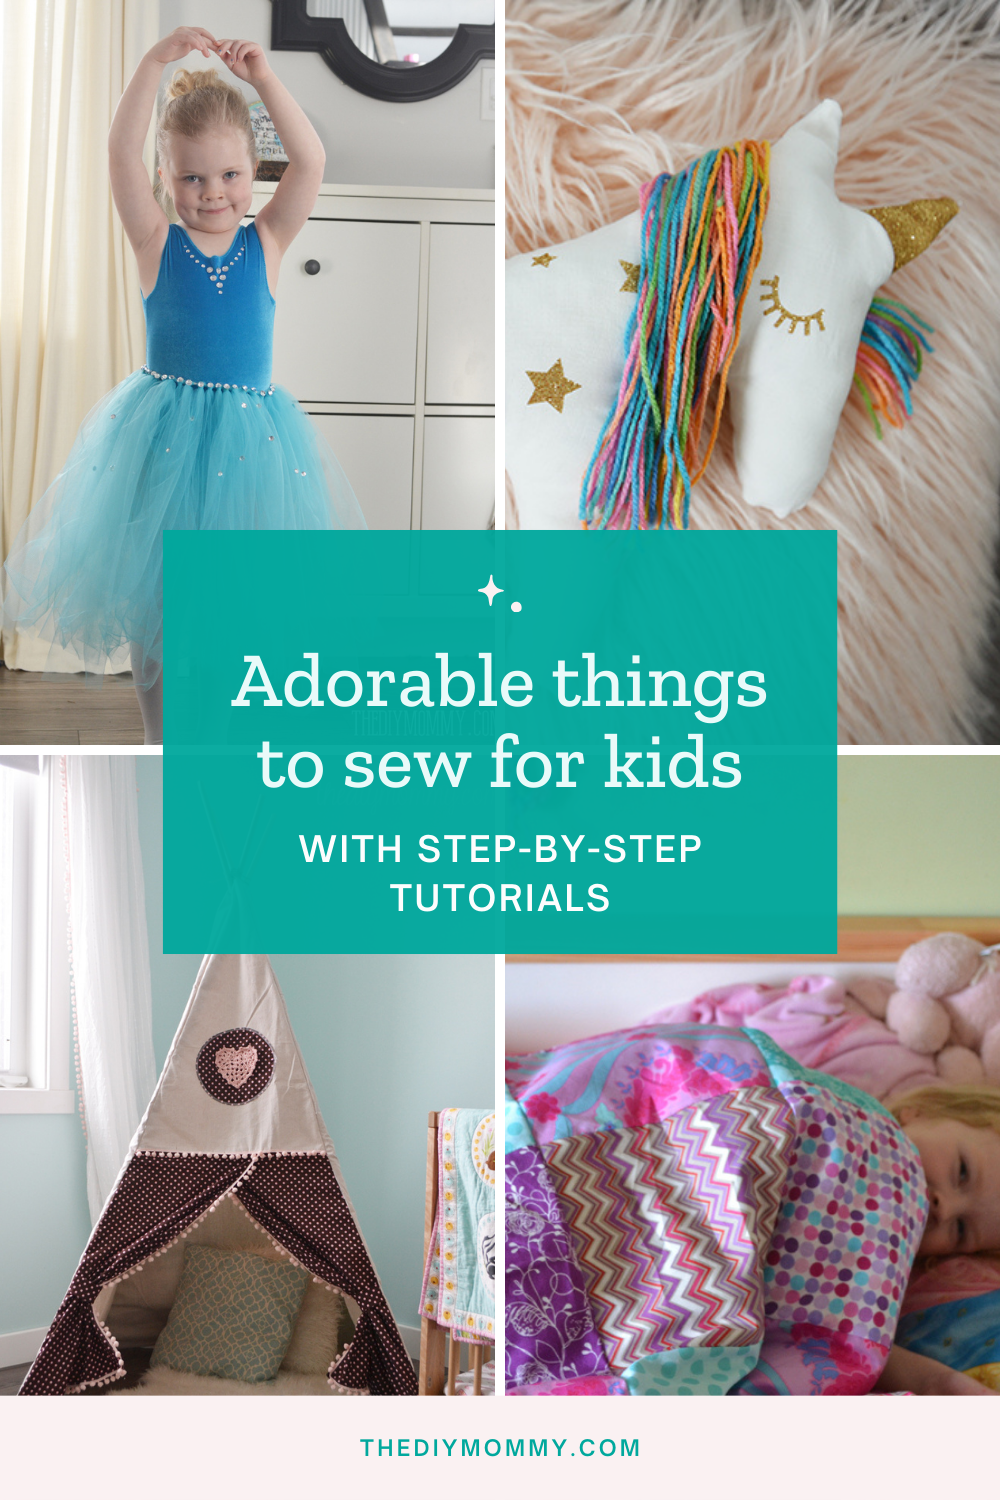 Things to sew for kids: an Elsa inspired dance dress, a unicorn plush toy, a play teepee, and a patchwork quilt.